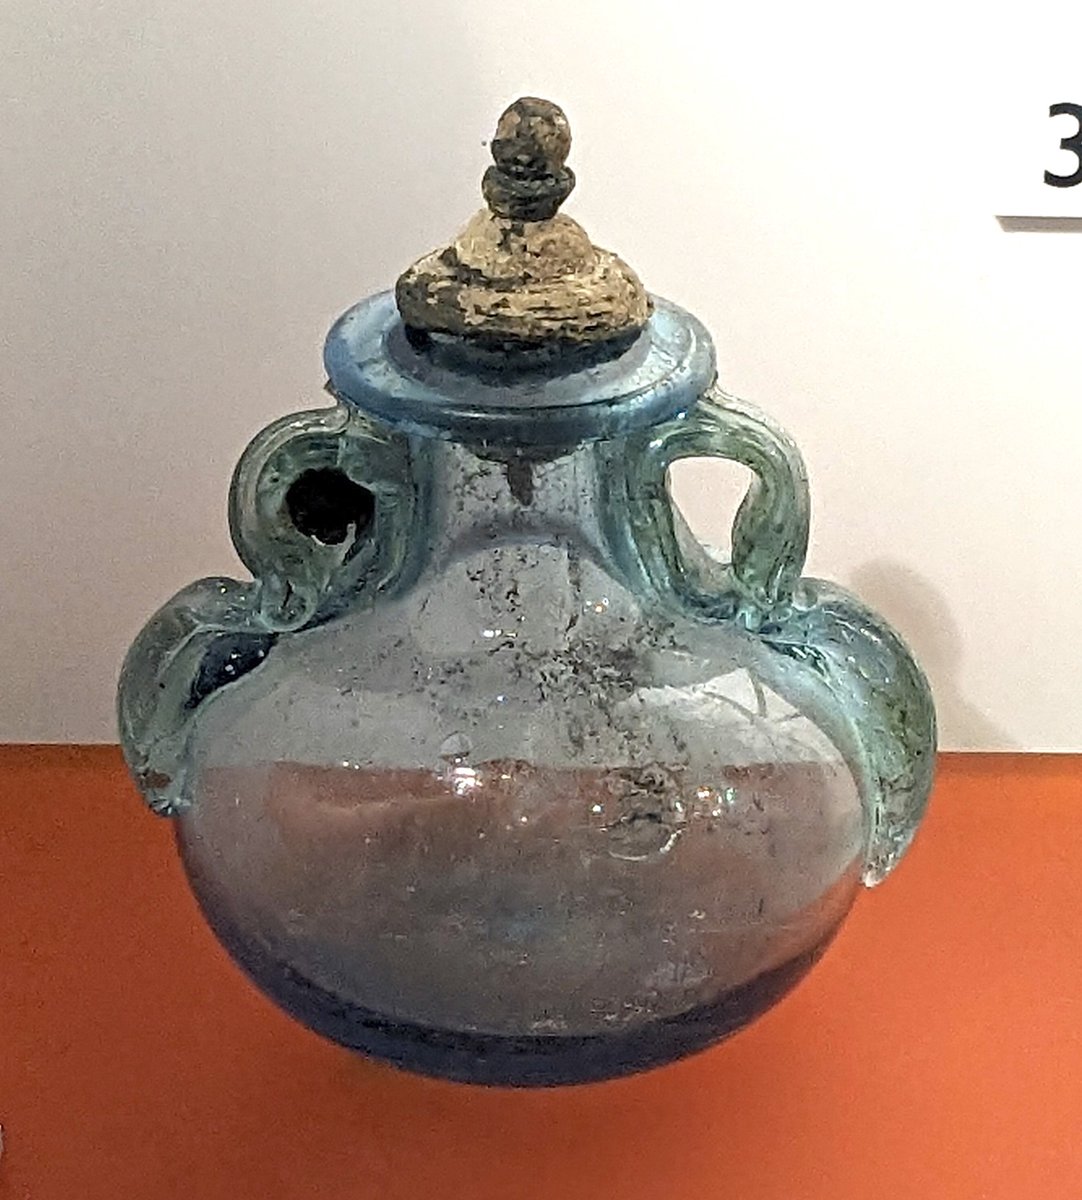 This lovely glass #flask complete with stopper is on display at #Corbridge #Roman Town museum. The handles have been made in the shape of stylised / abstract dolphins.